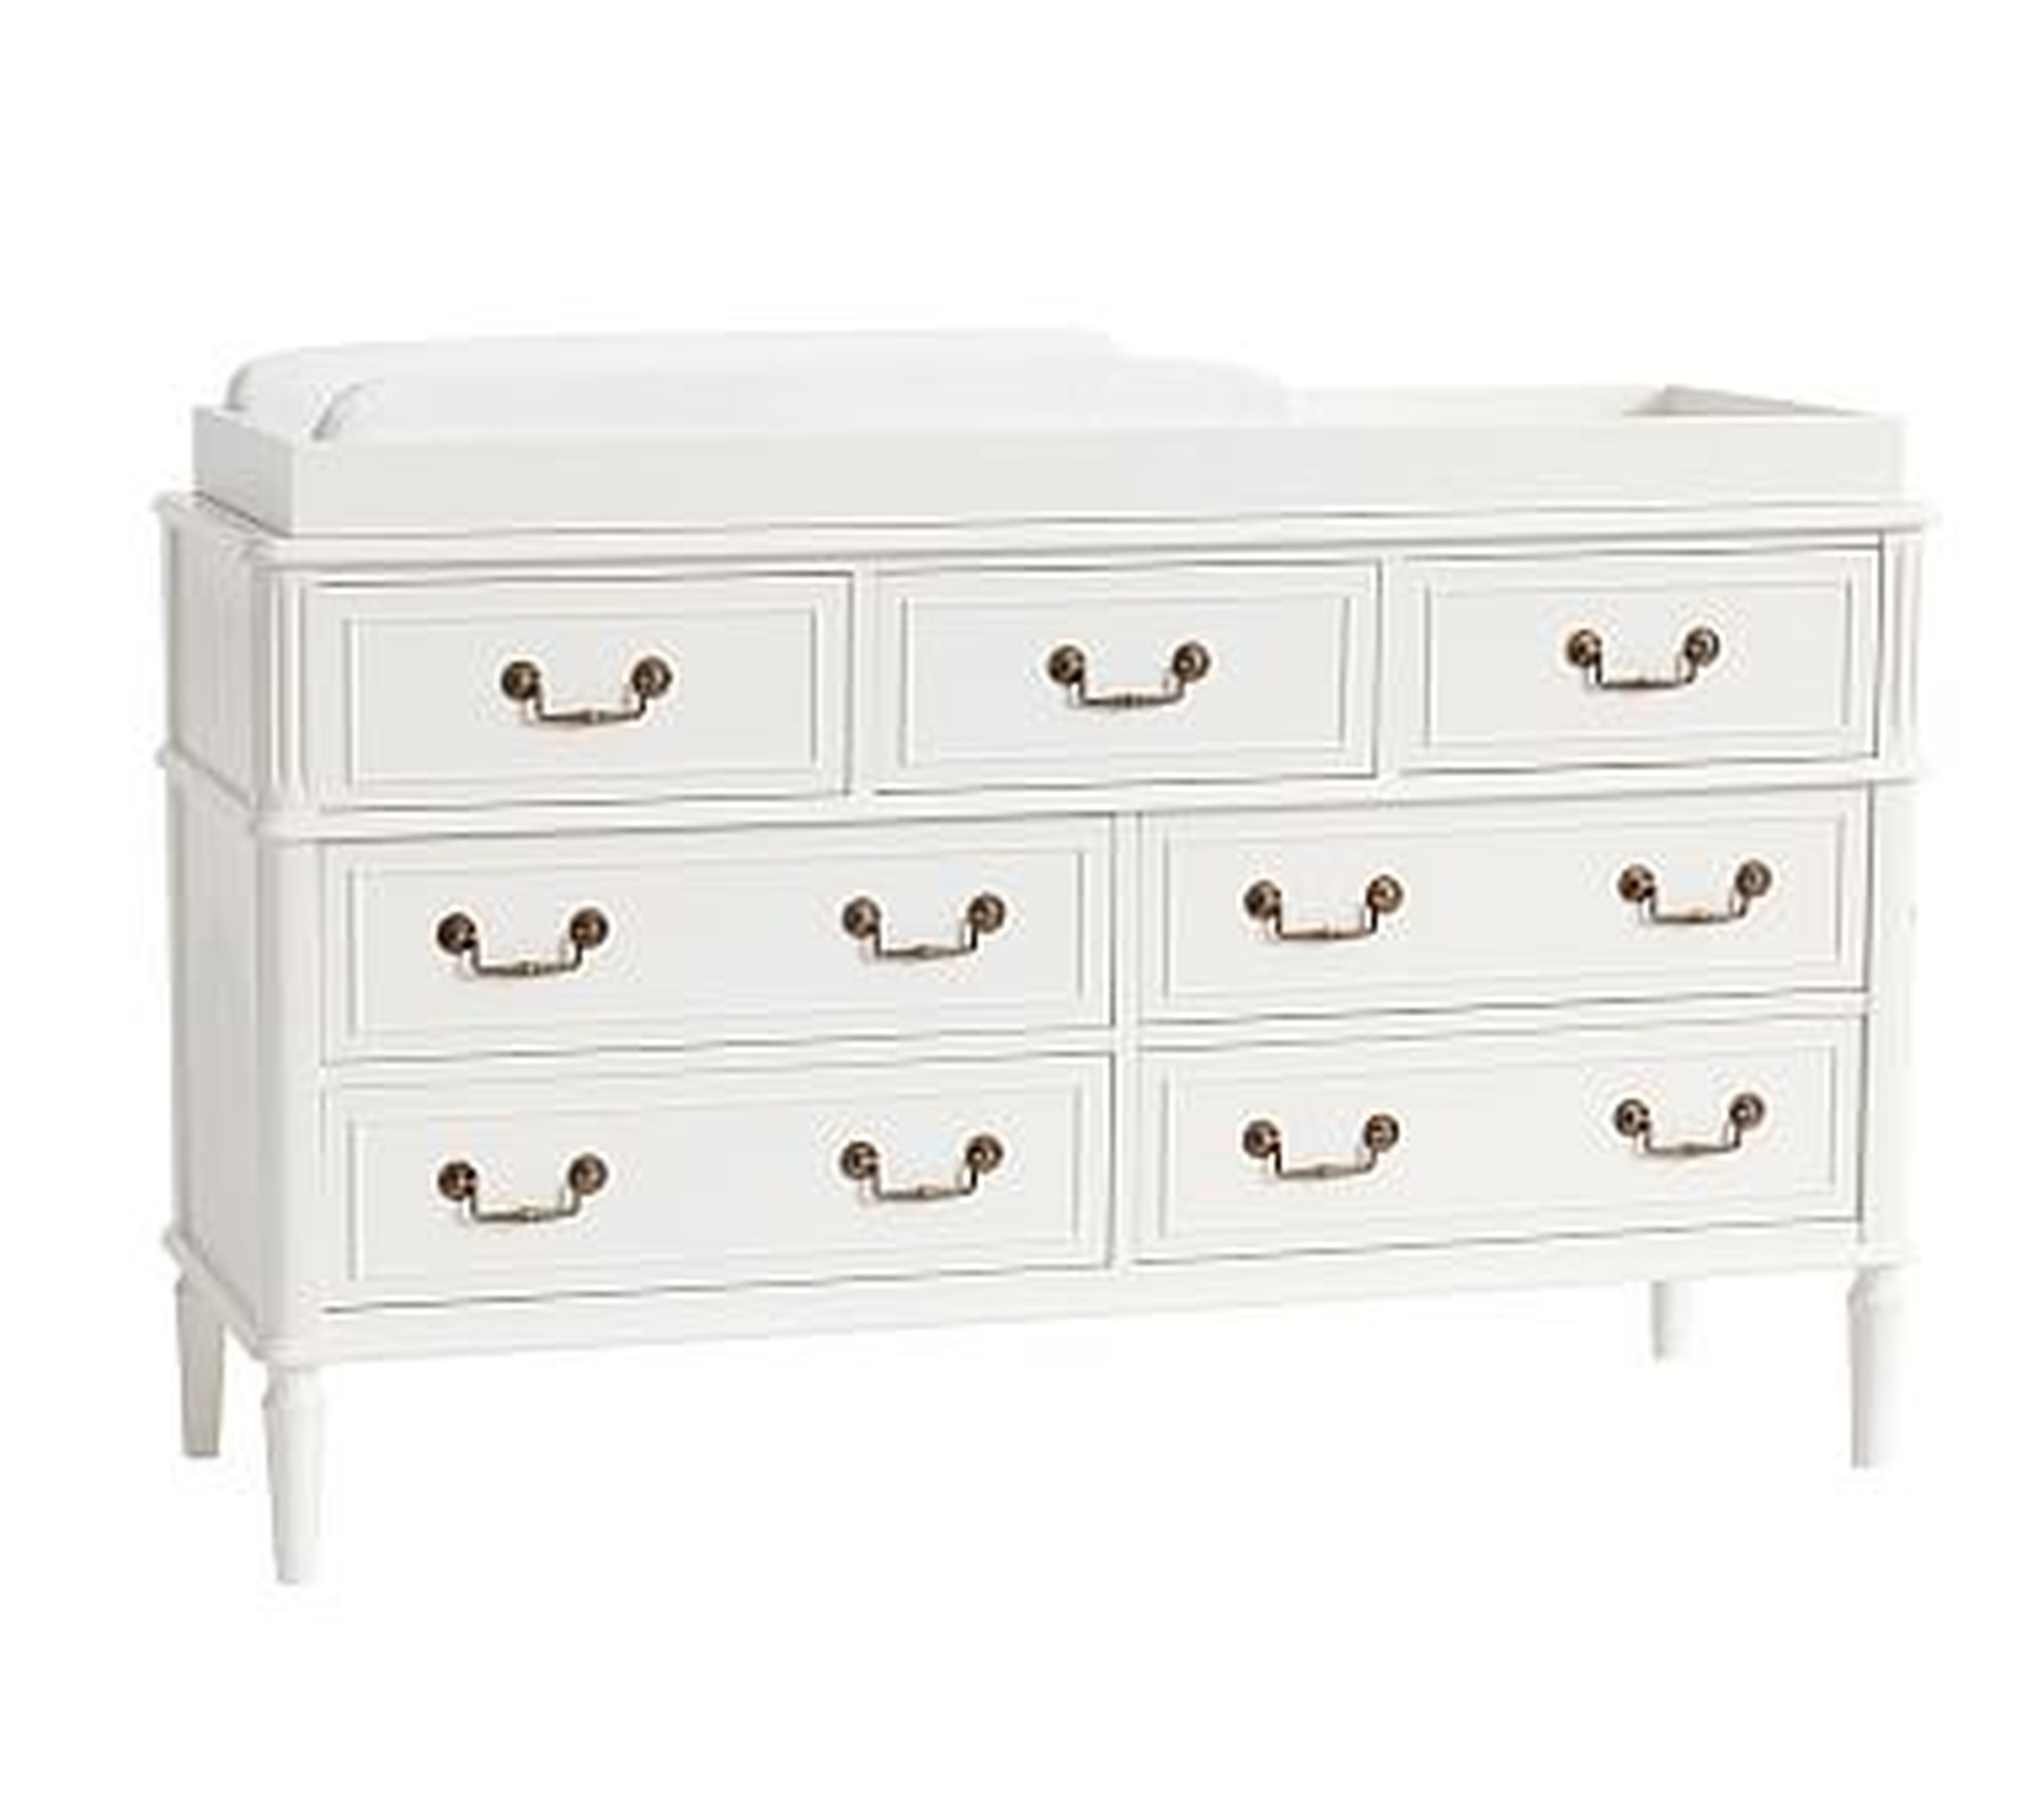 Rosalie Extra-Wide Dresser and Topper Set, French White, Flat Rate - Pottery Barn Kids